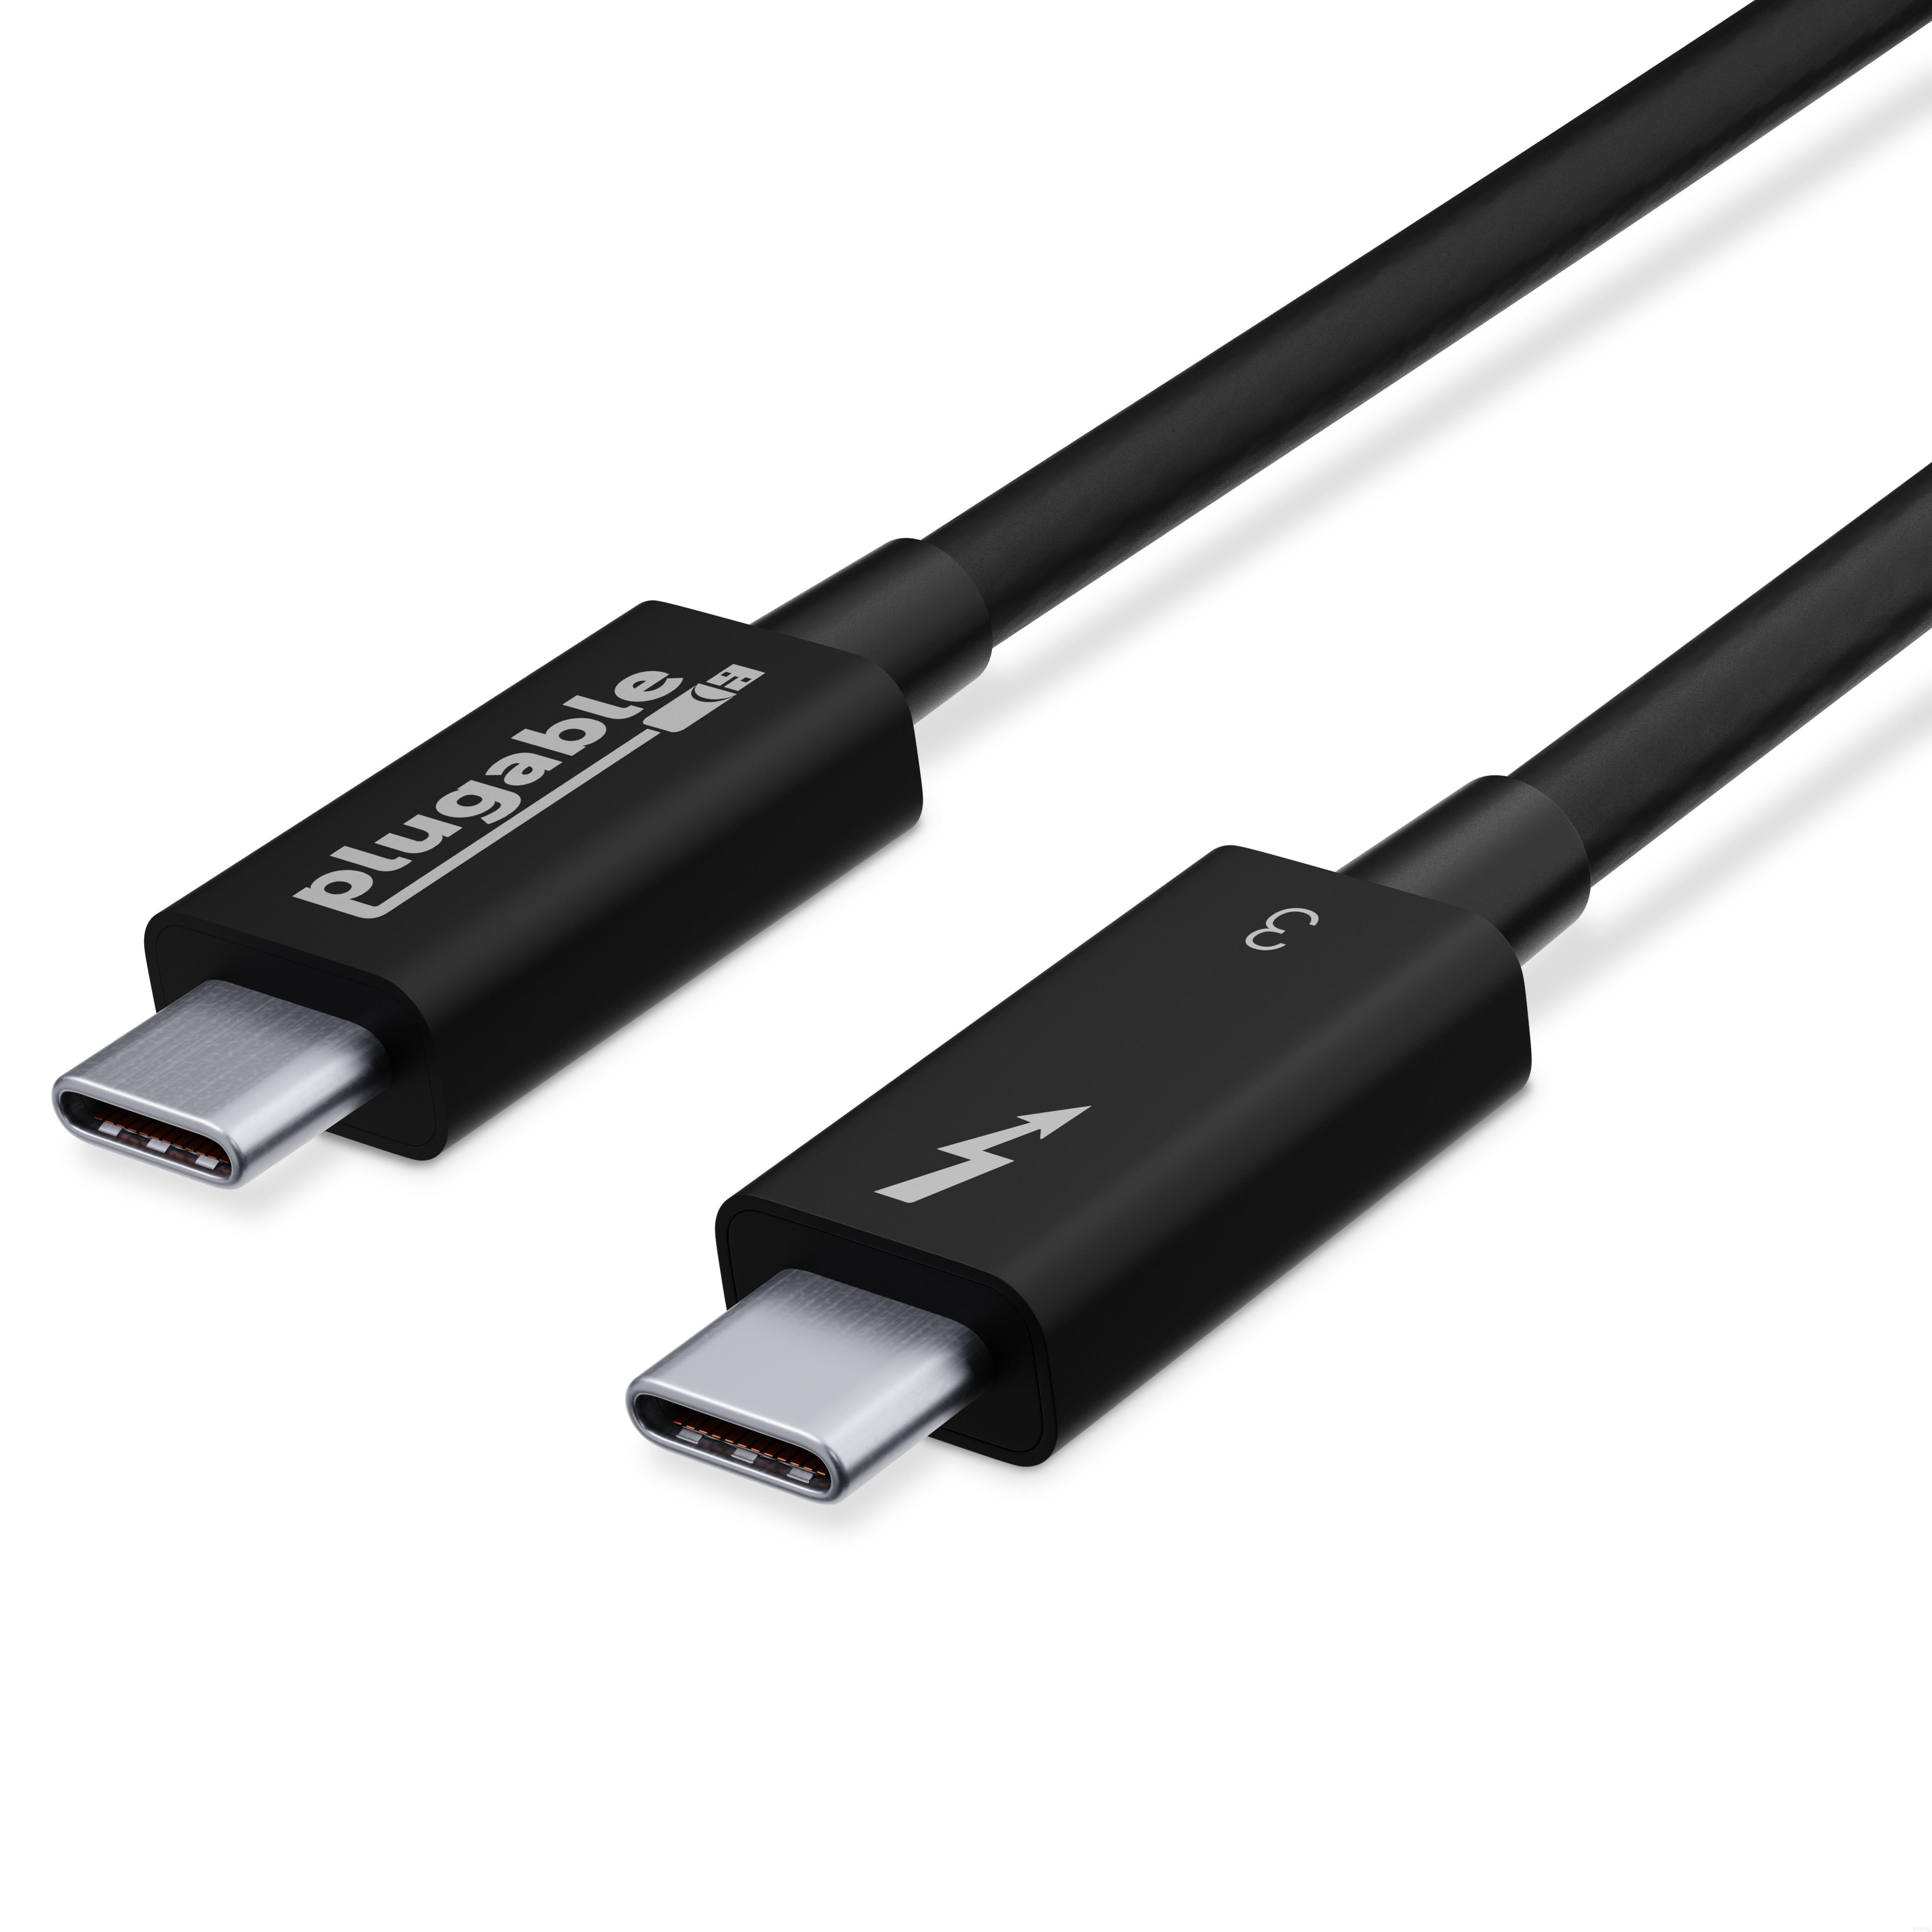 Plugable Thunderbolt 3 Cable (40Gbps, 2.6ft/0.8m)